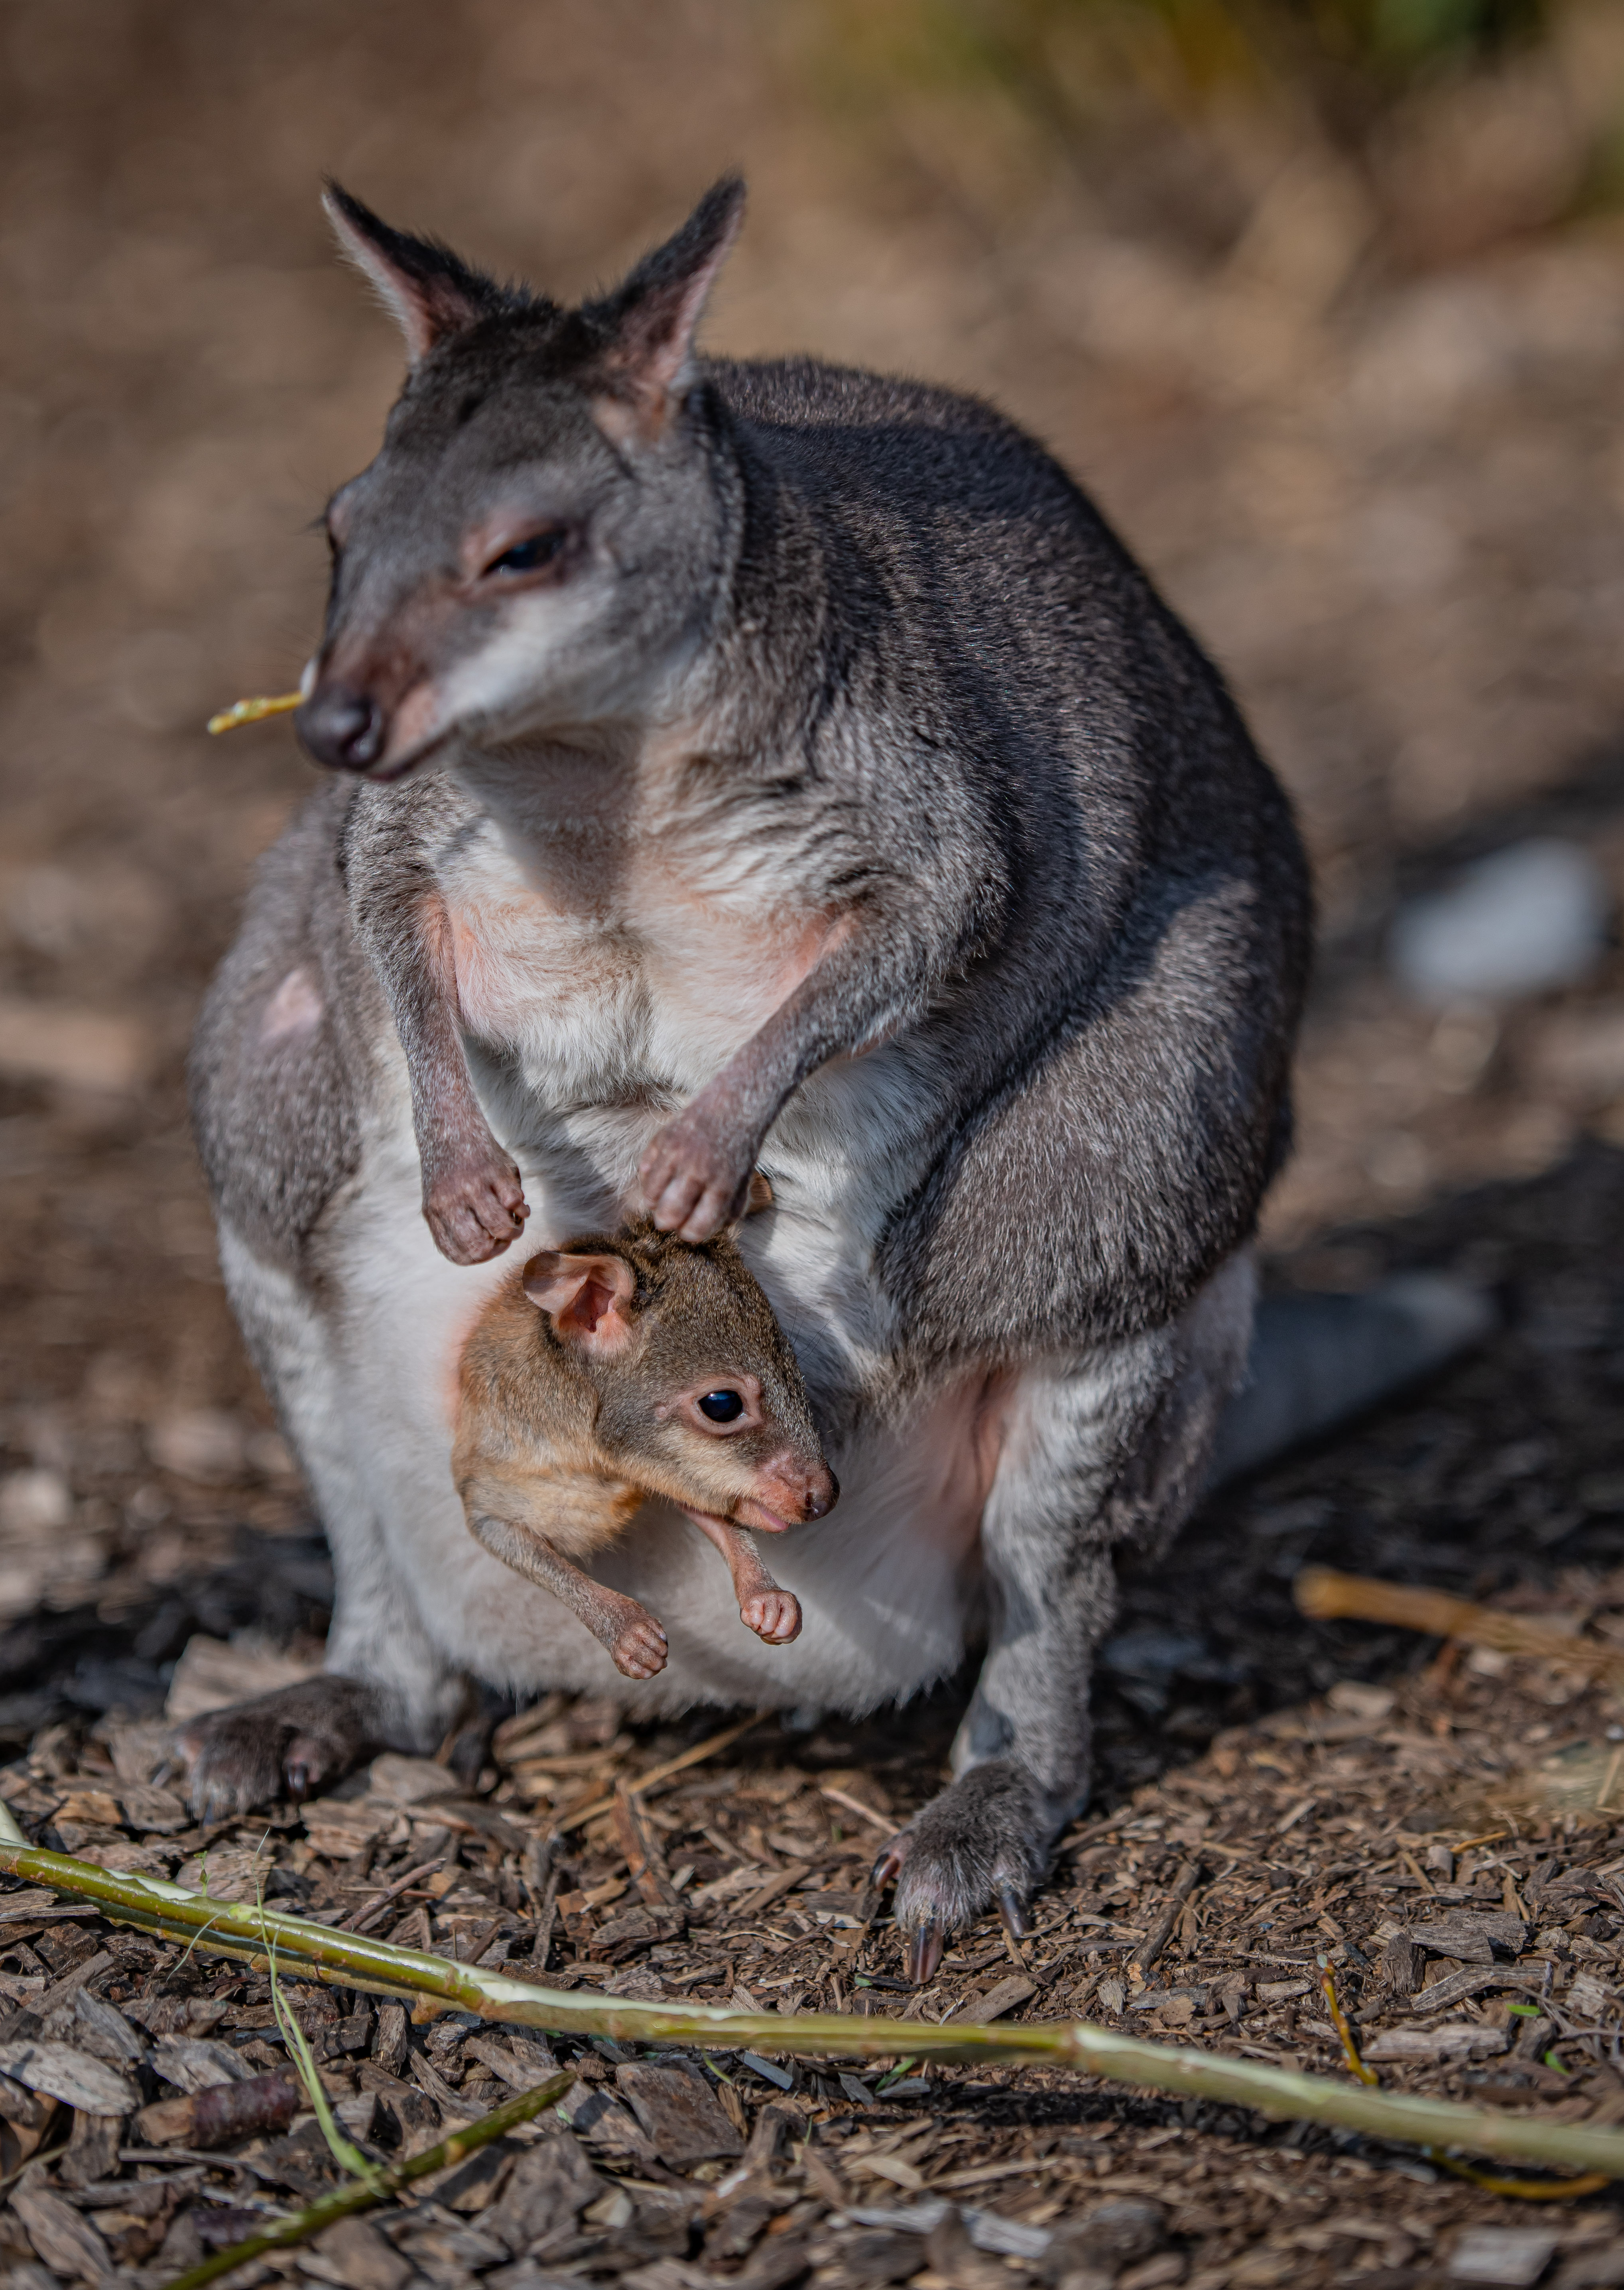 A newborn dusky pademelon joey peeks out of mum's pouch for the first time at Chester Zoo. 